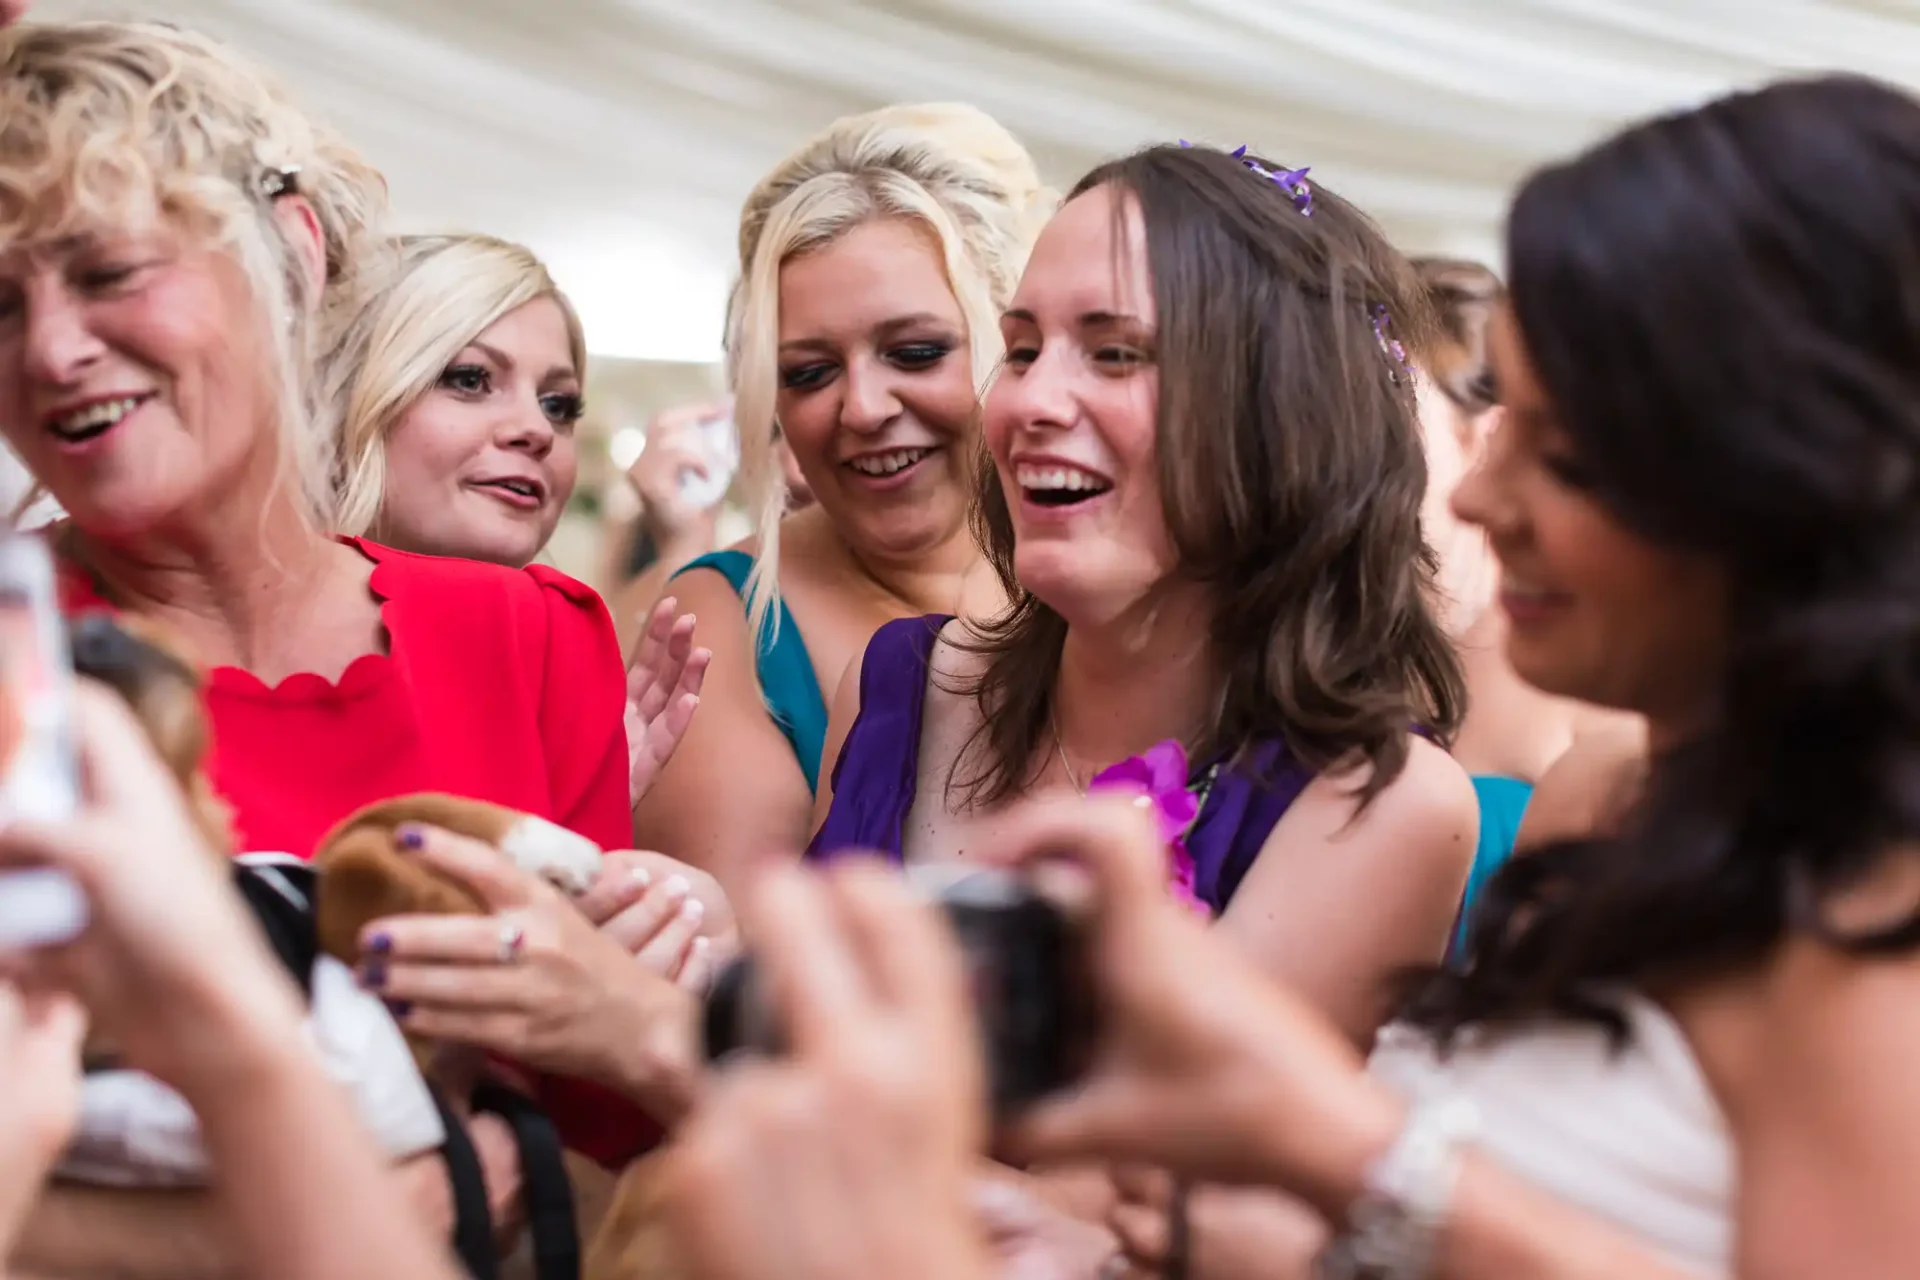 Group of women laughing and clapping at a social event under a tent, one capturing the moment on her smartphone.